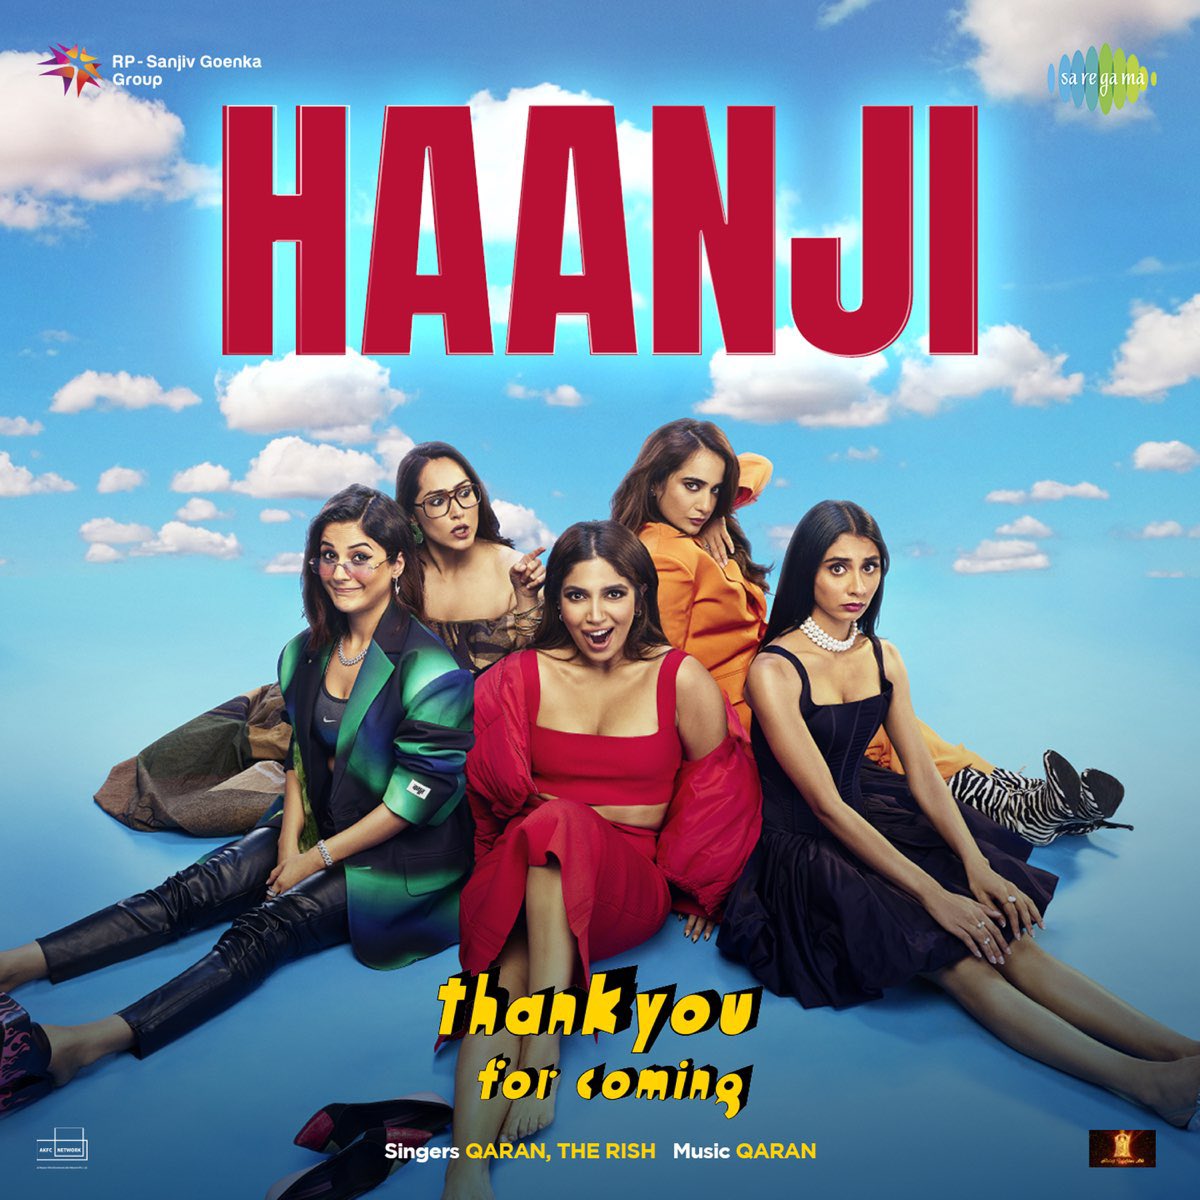 NEW SONG ADDICTION ALERT 🚨 #Haanji from #ThankYouForComing is a certified banger 💯 One can’t blame #BhumiPednekar and #ShehnaazGiII (both totally own the video) for letting loose at a club to this party track! The song by QARAN & The Rish sounds like no other song coming out…